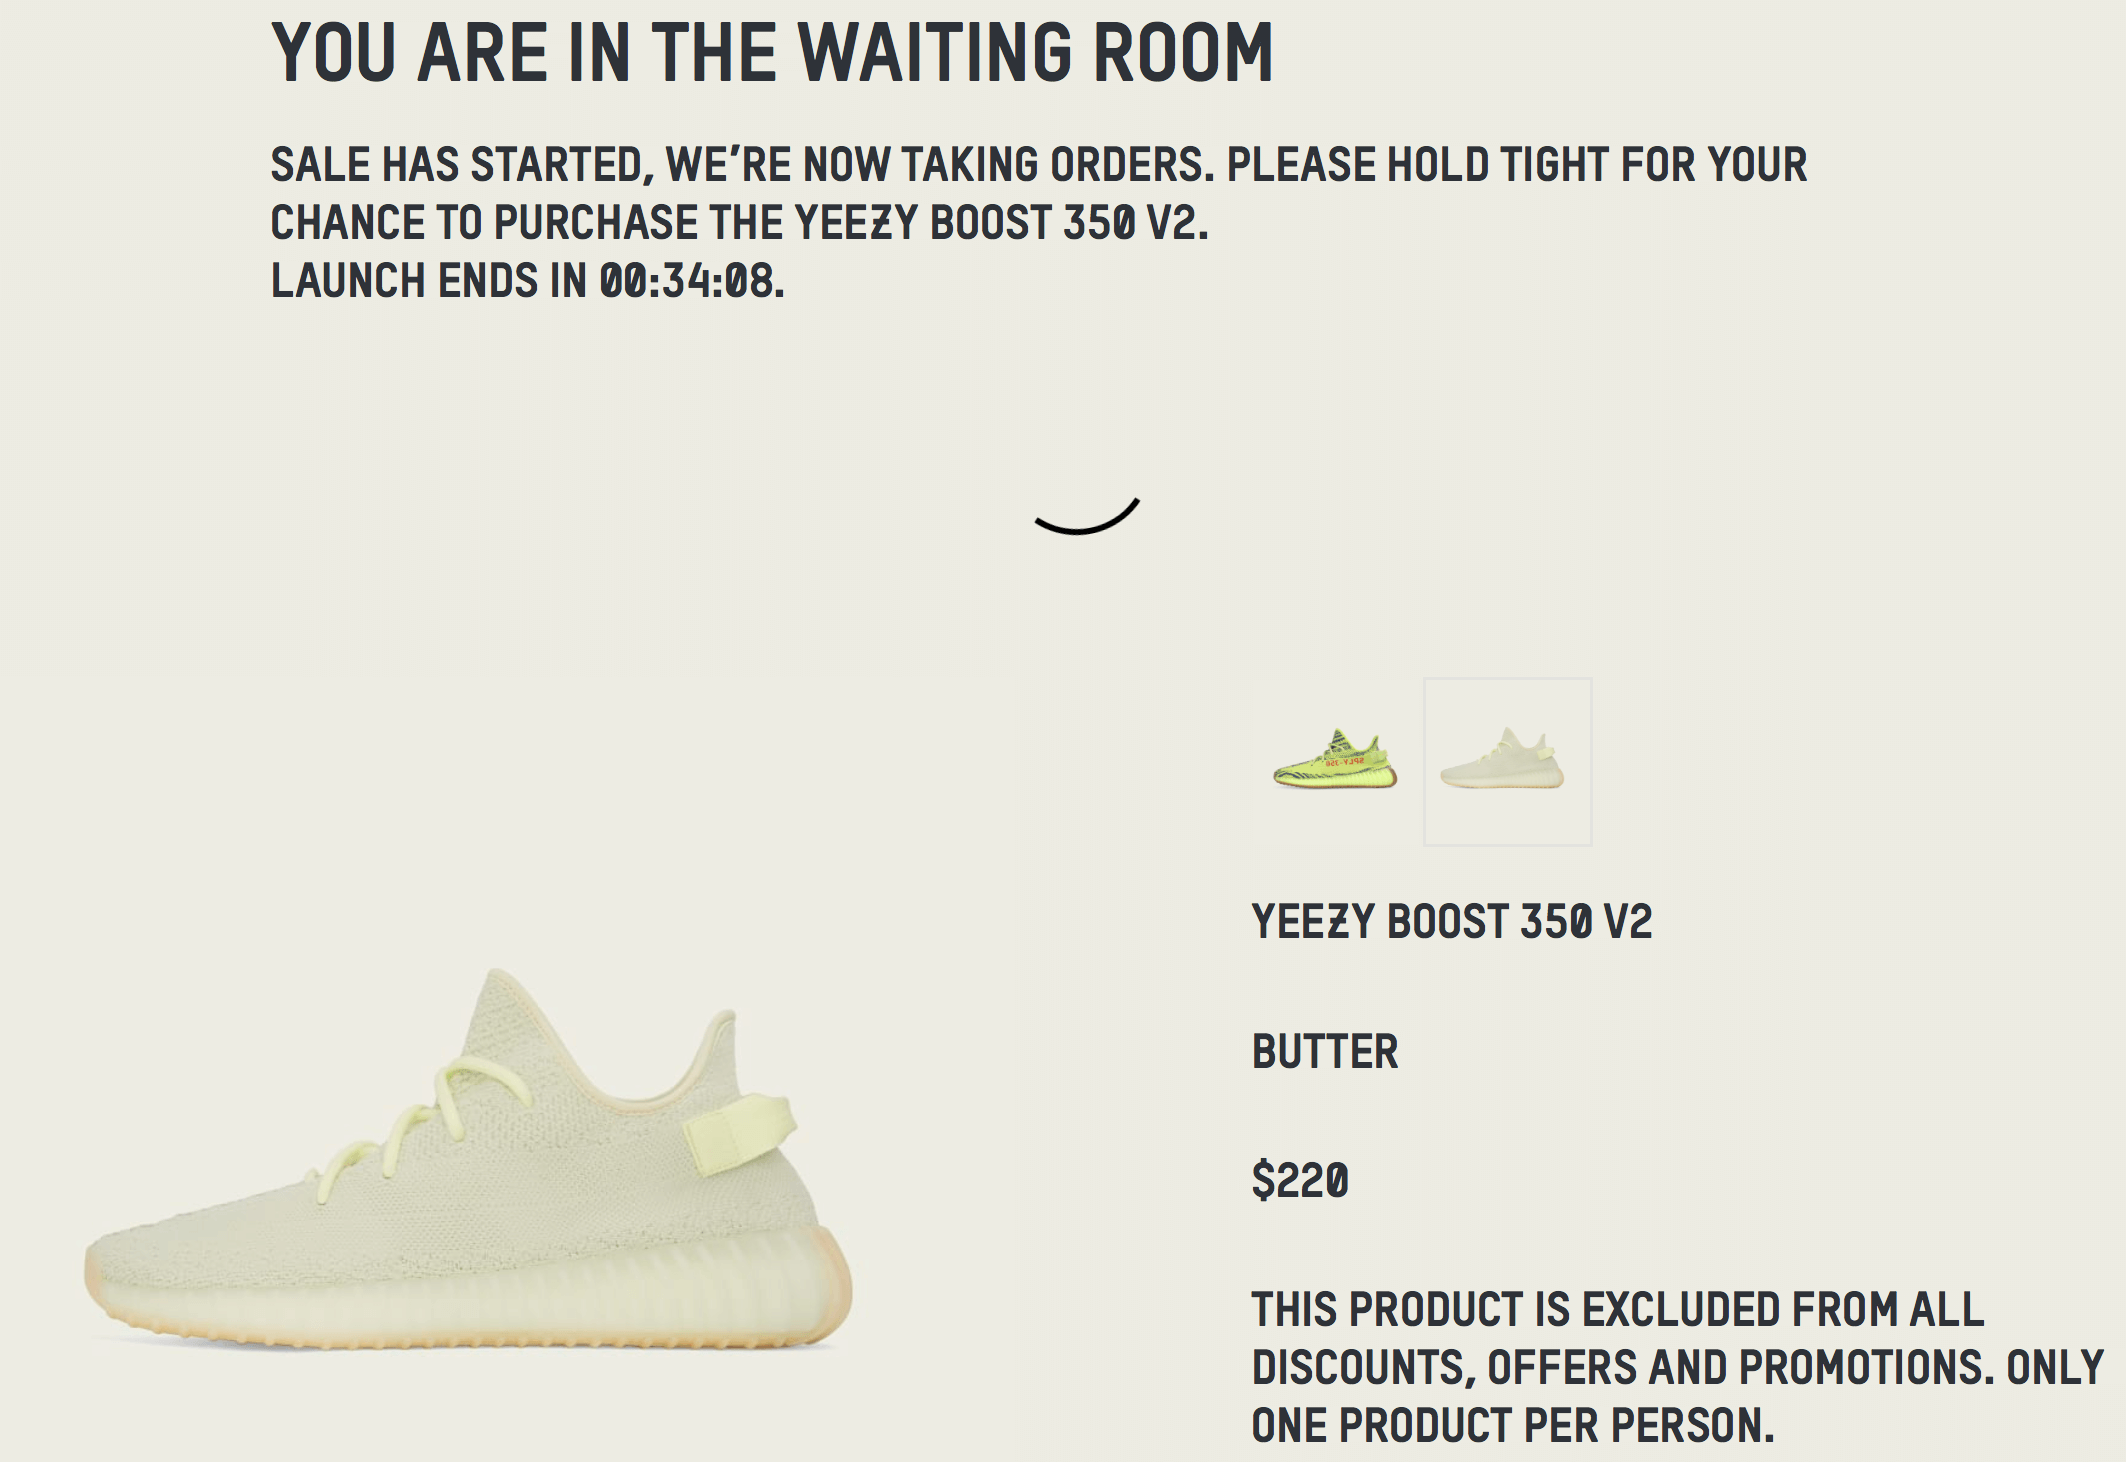 how to get past yeezy waiting room